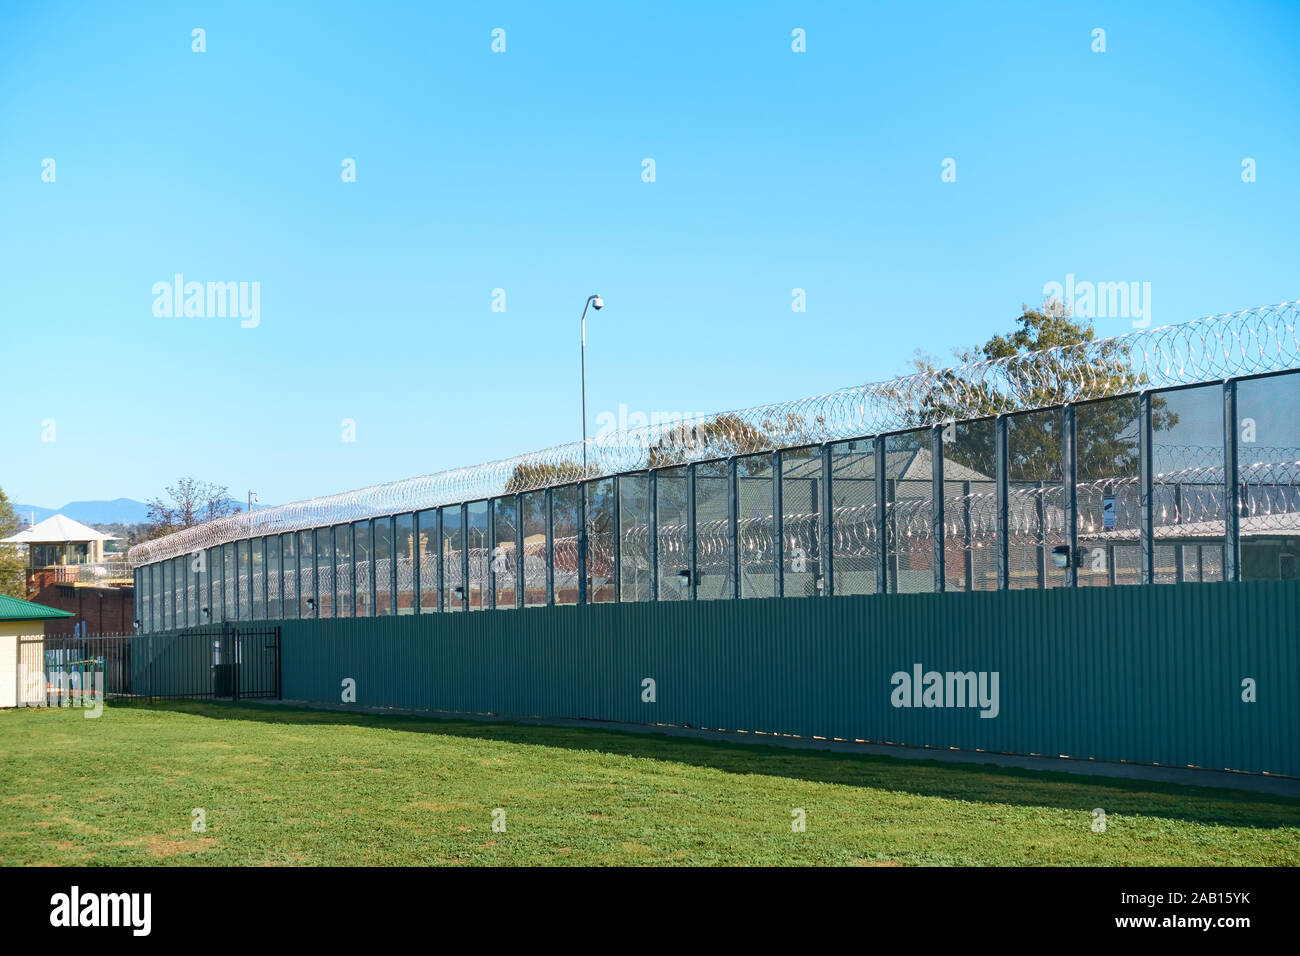 Tamworth Correctional Centre  fence with steel mesh topped with razor wire. NSW Australia. Stock Photo